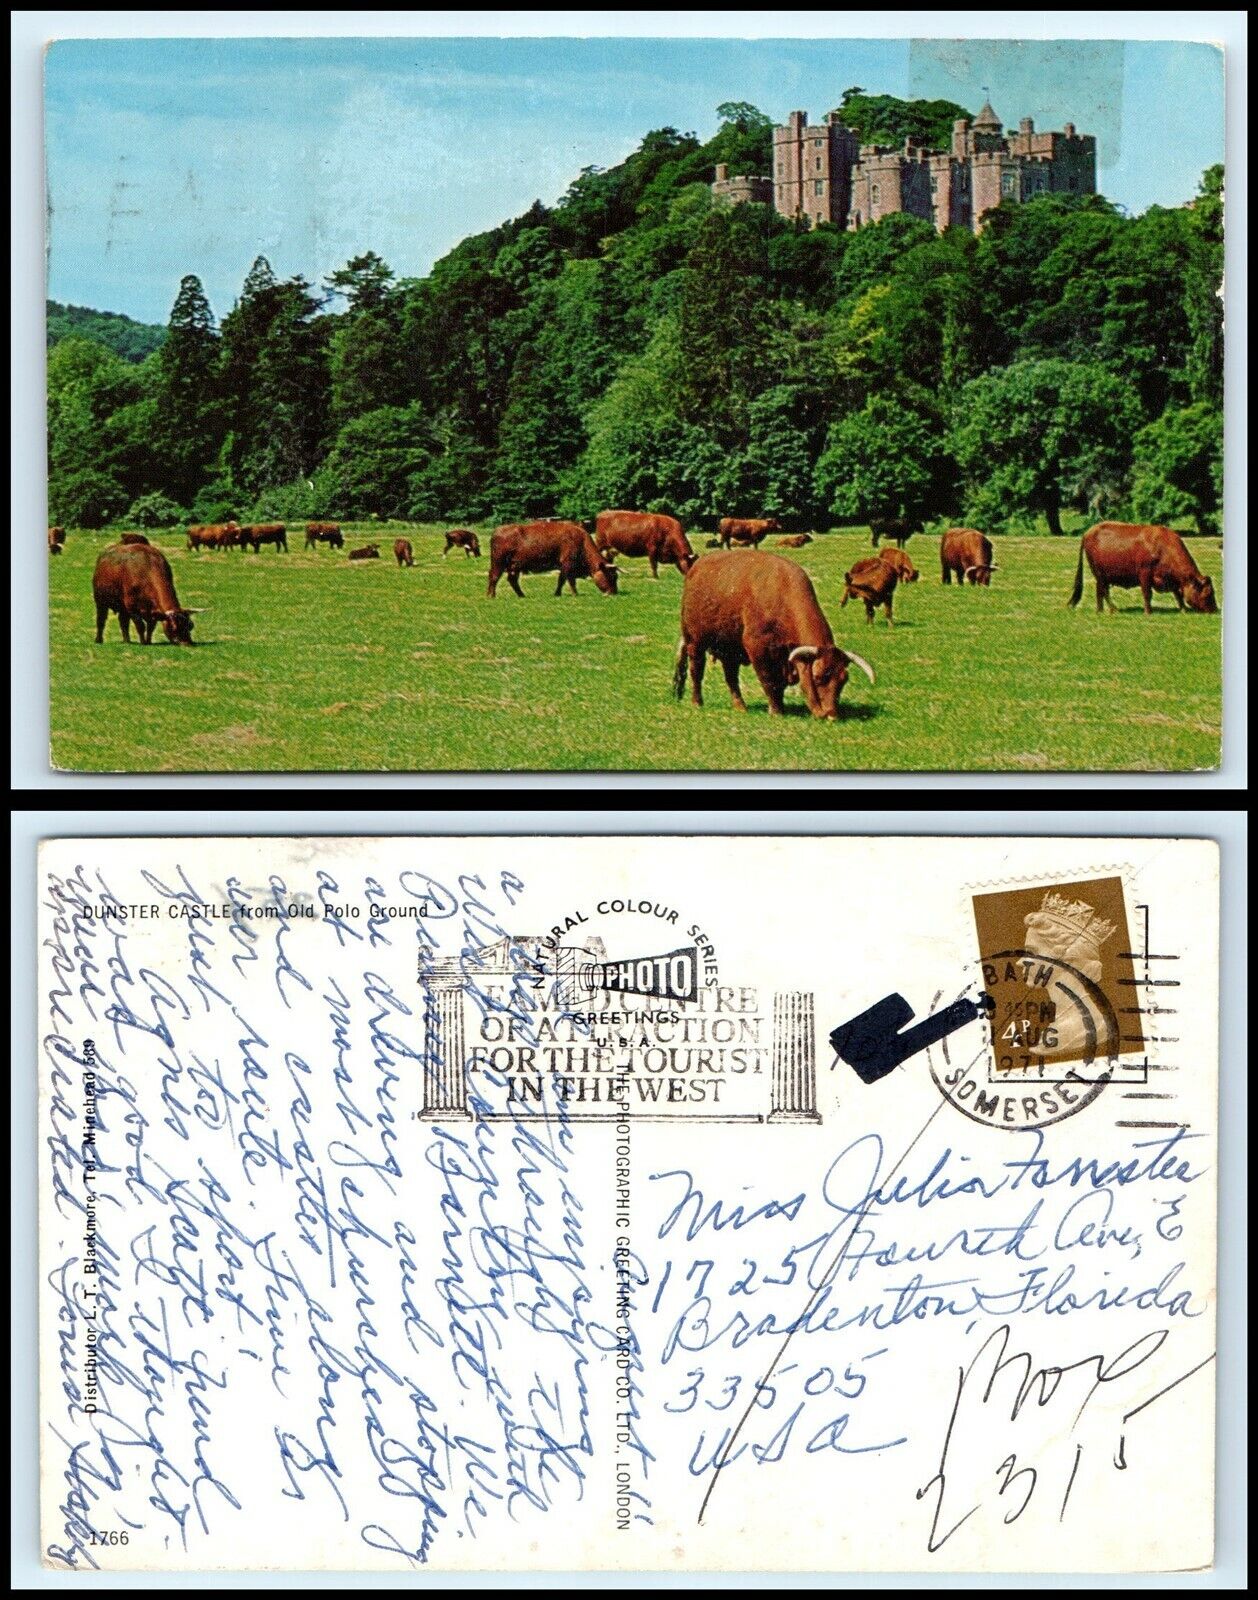 UK Postcard - Dunster Castle from Old Polo Ground R50